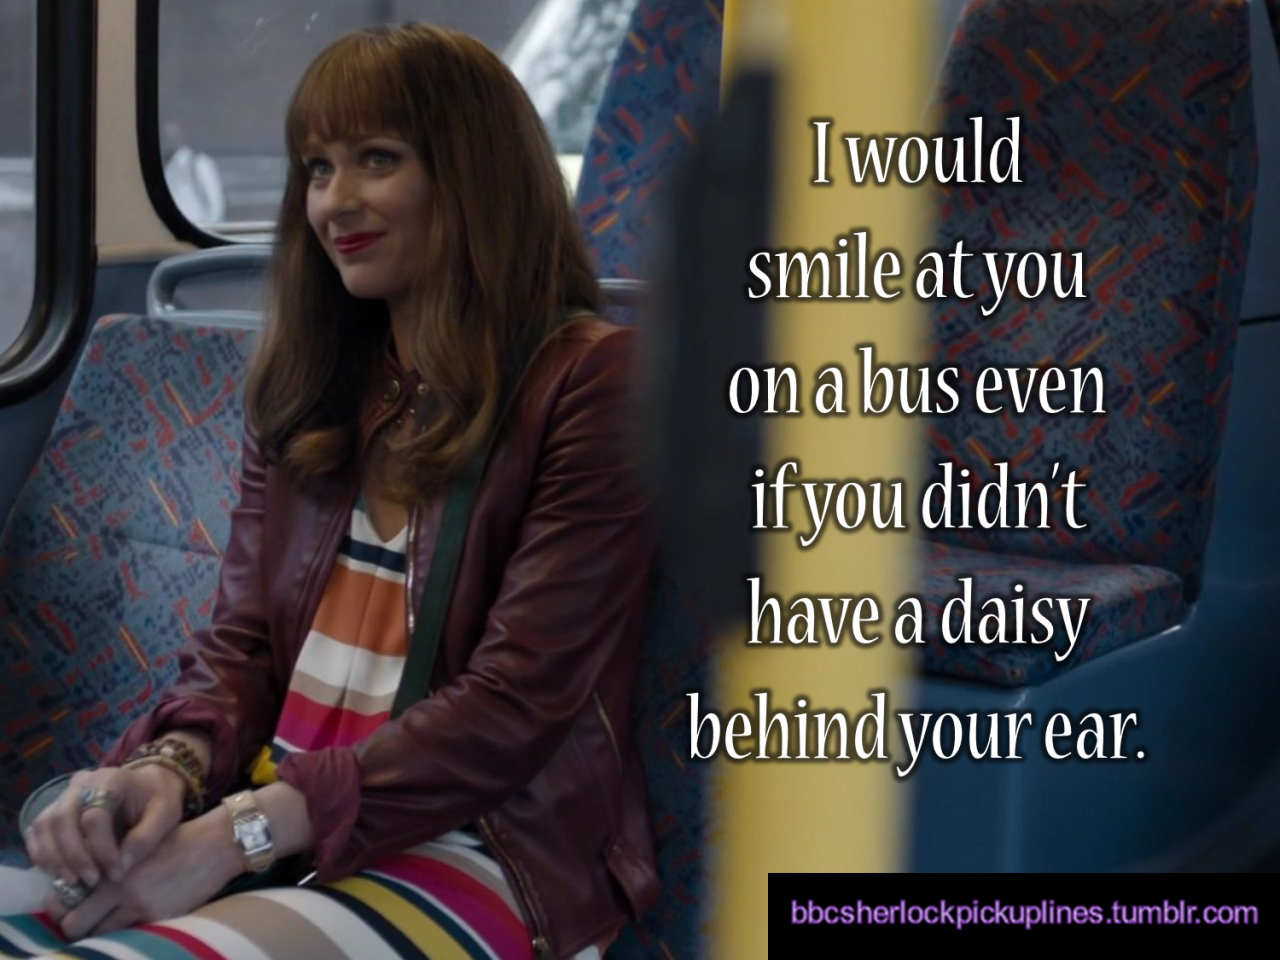 â€œI would smile at you on a bus even if you didnâ€™t have a daisy behind